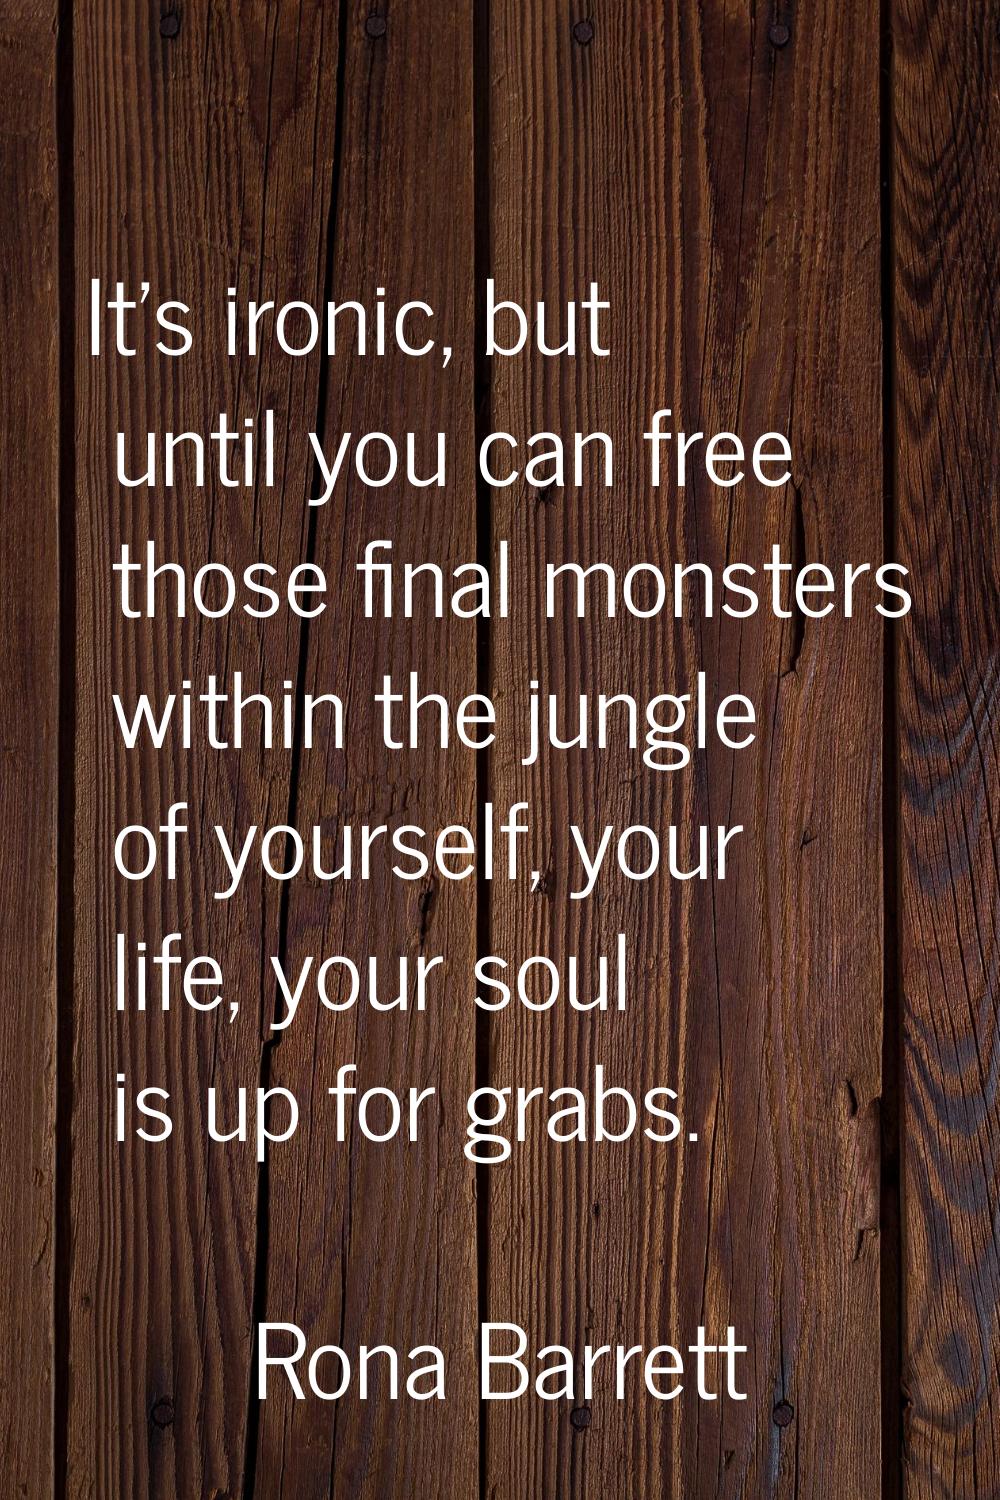 It's ironic, but until you can free those final monsters within the jungle of yourself, your life, 